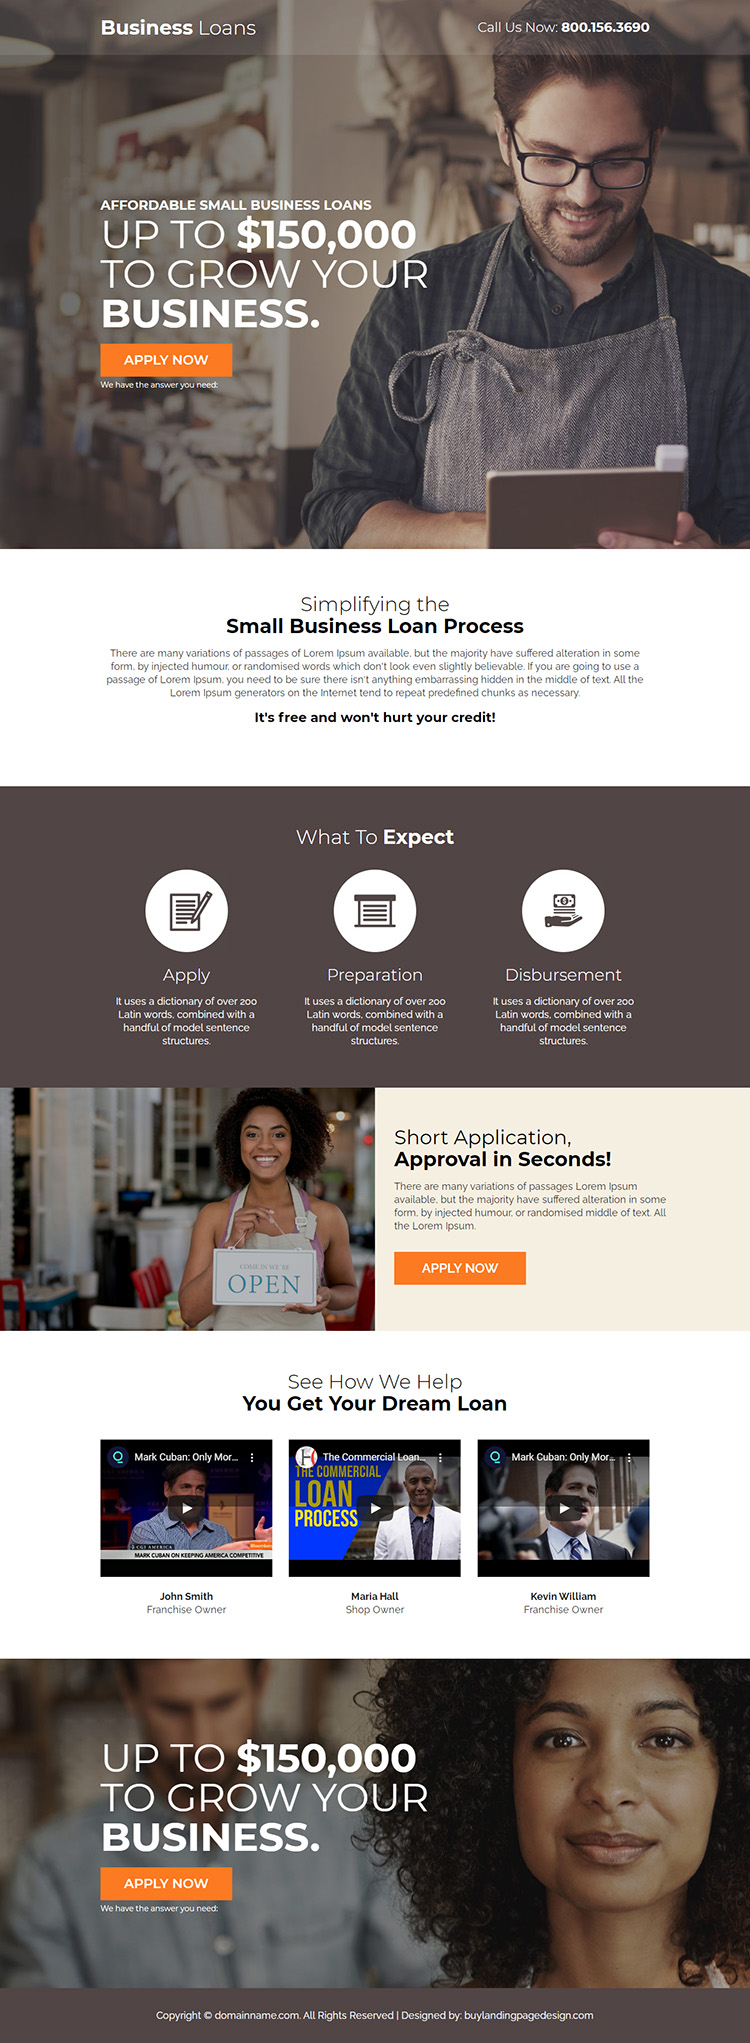 affordable small business loan responsive landing page design